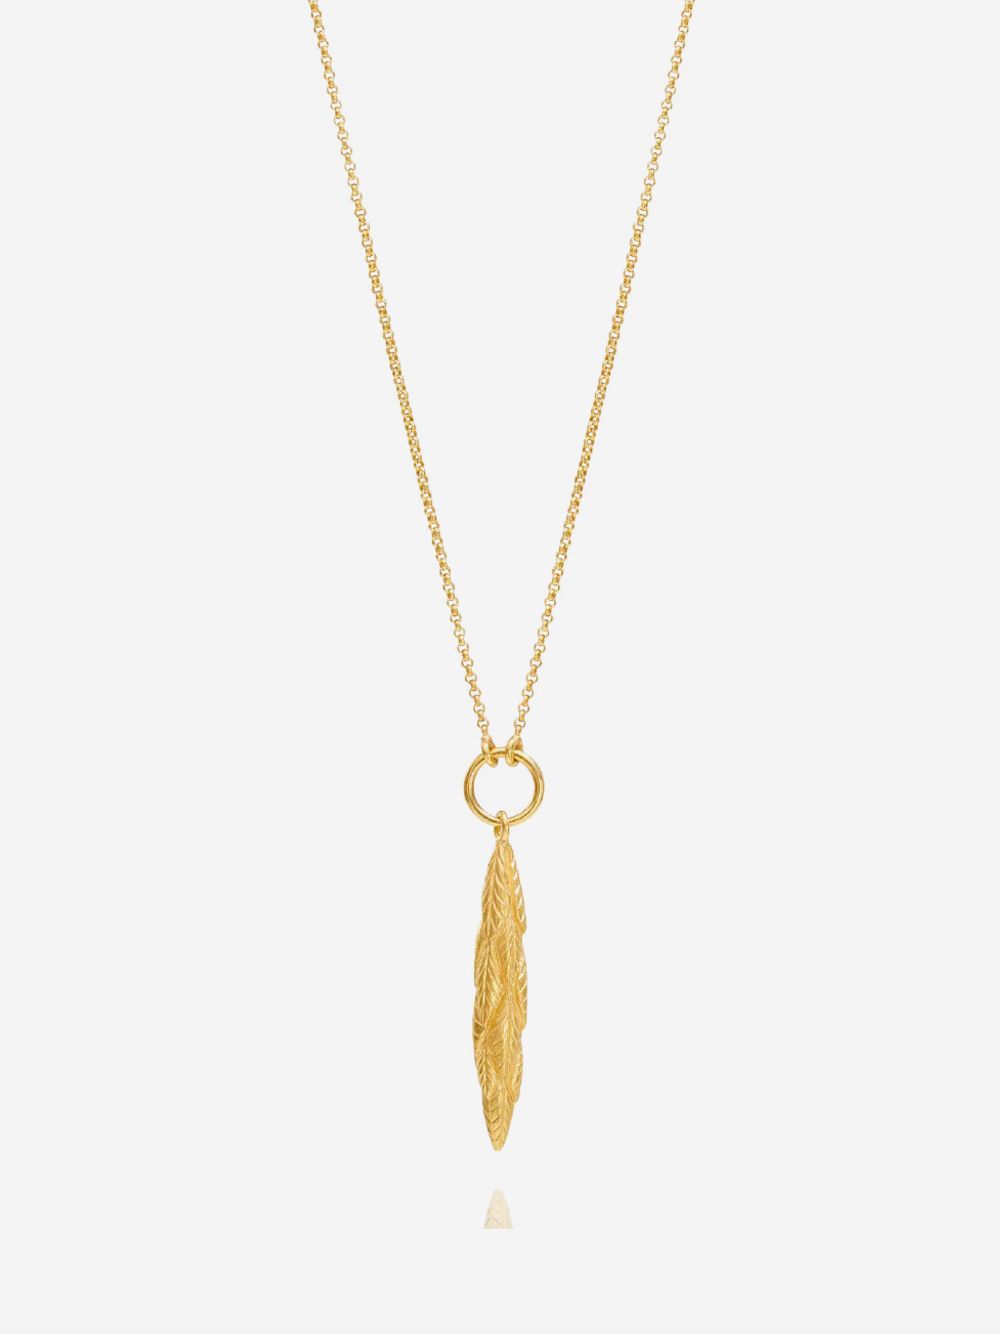 Bromelia Long Necklace with Pendant